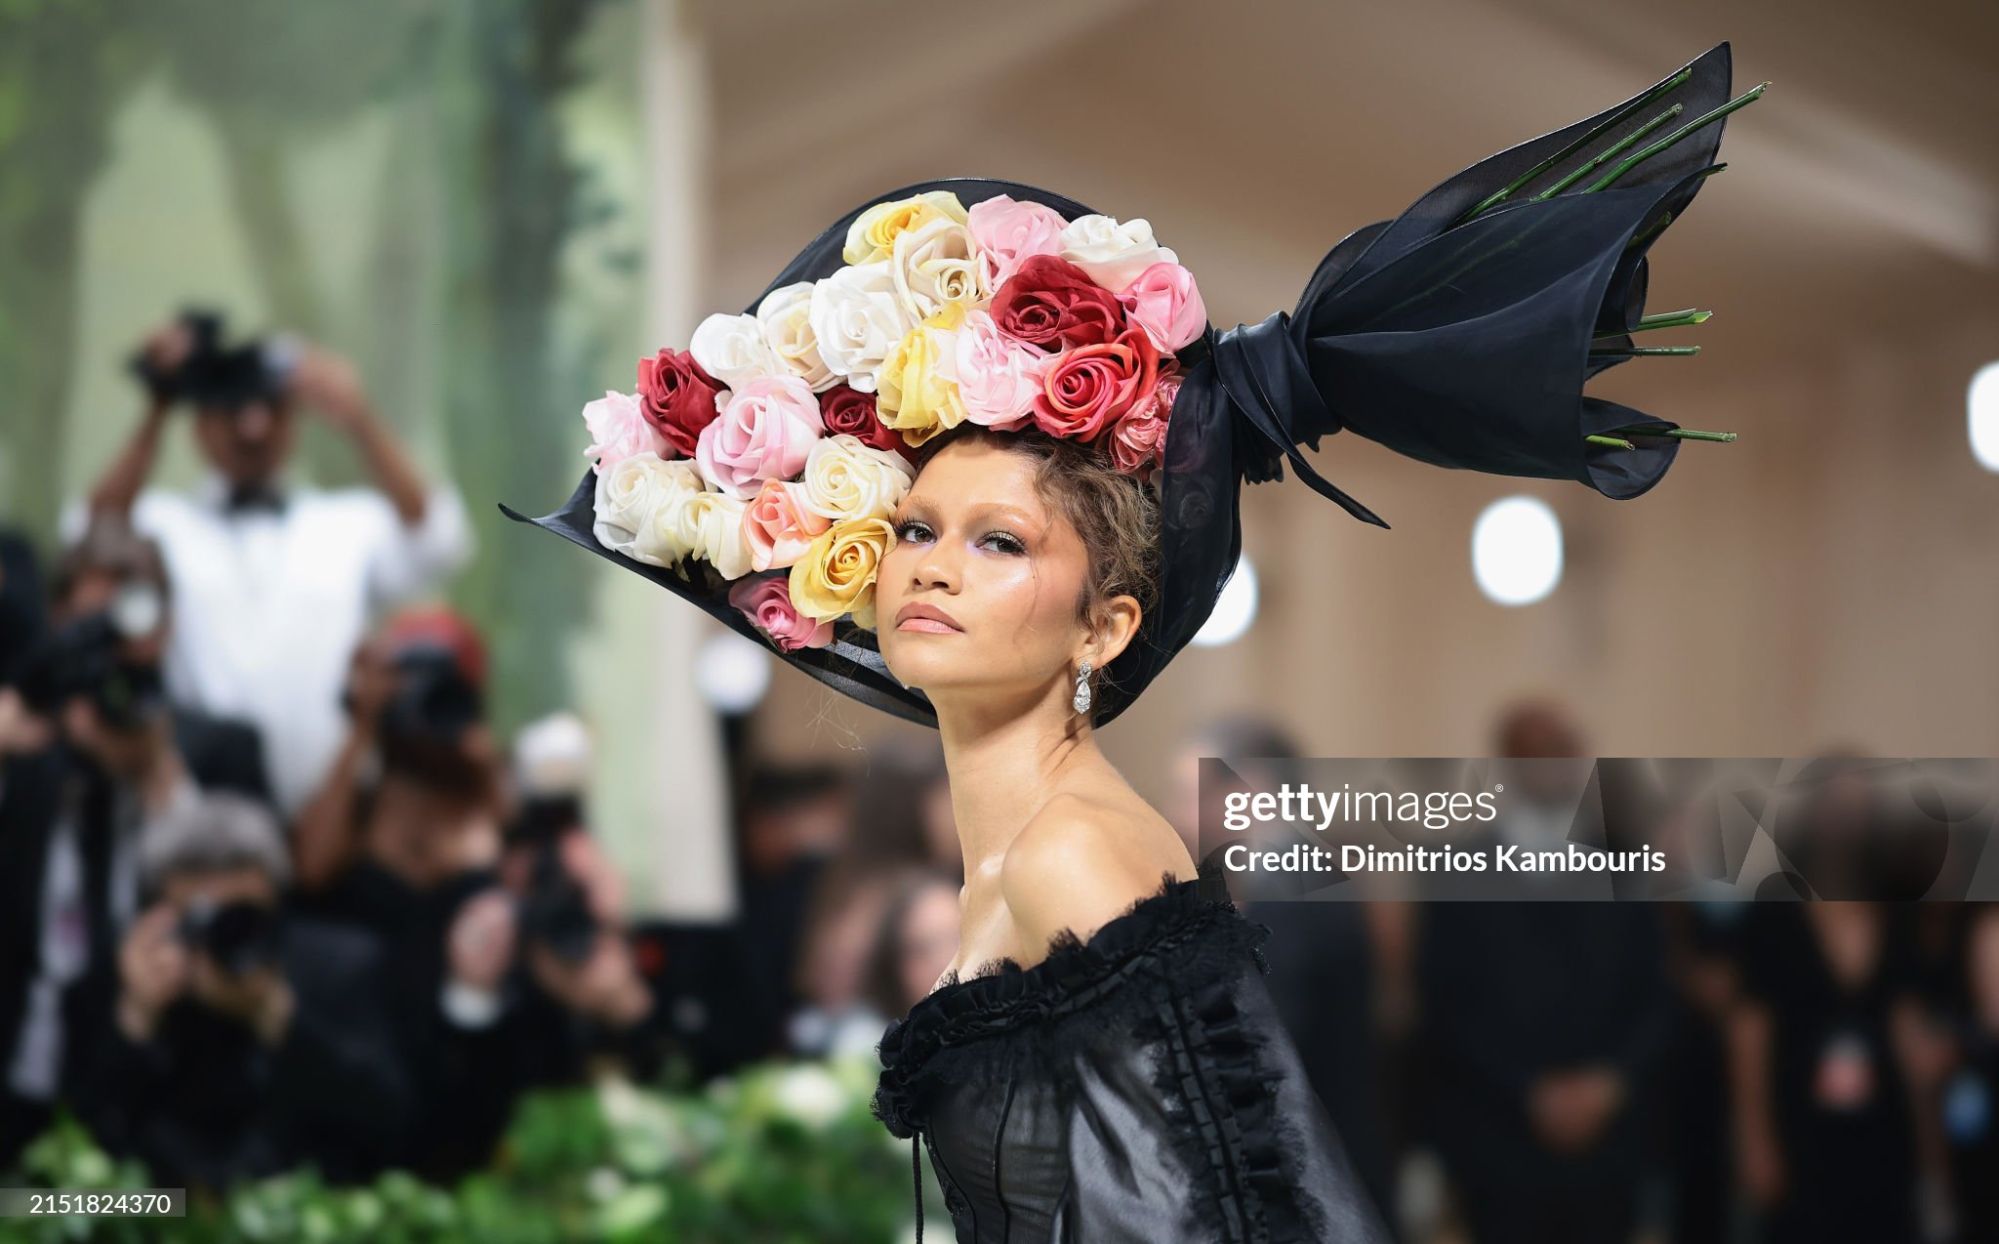 gettyimages-2151824370-2048x2048.jpg